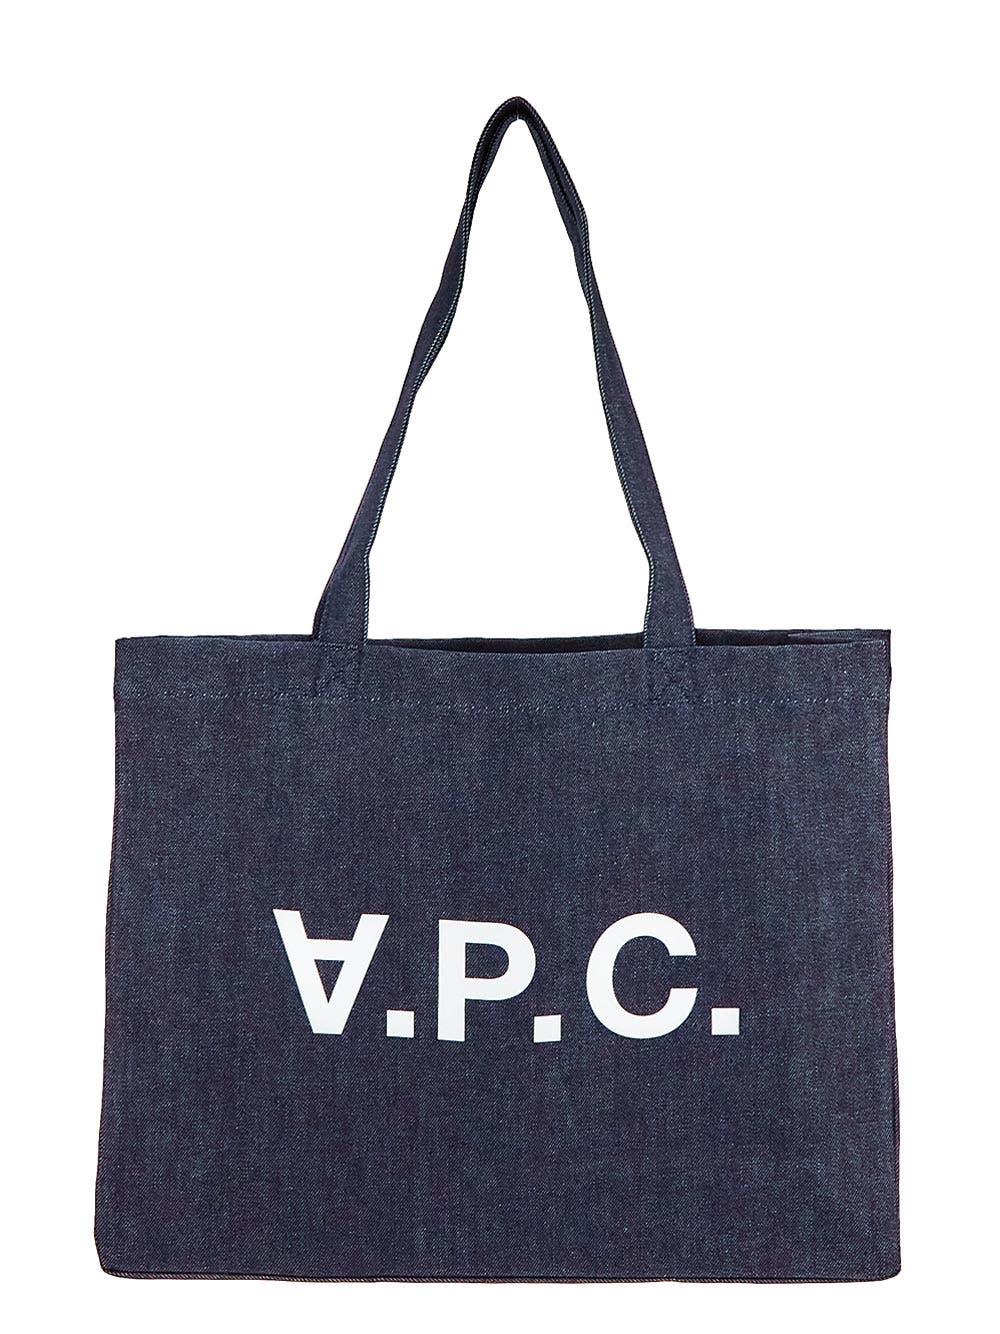 A.P.C. Logo Large Tote Bag in Blue | Lyst